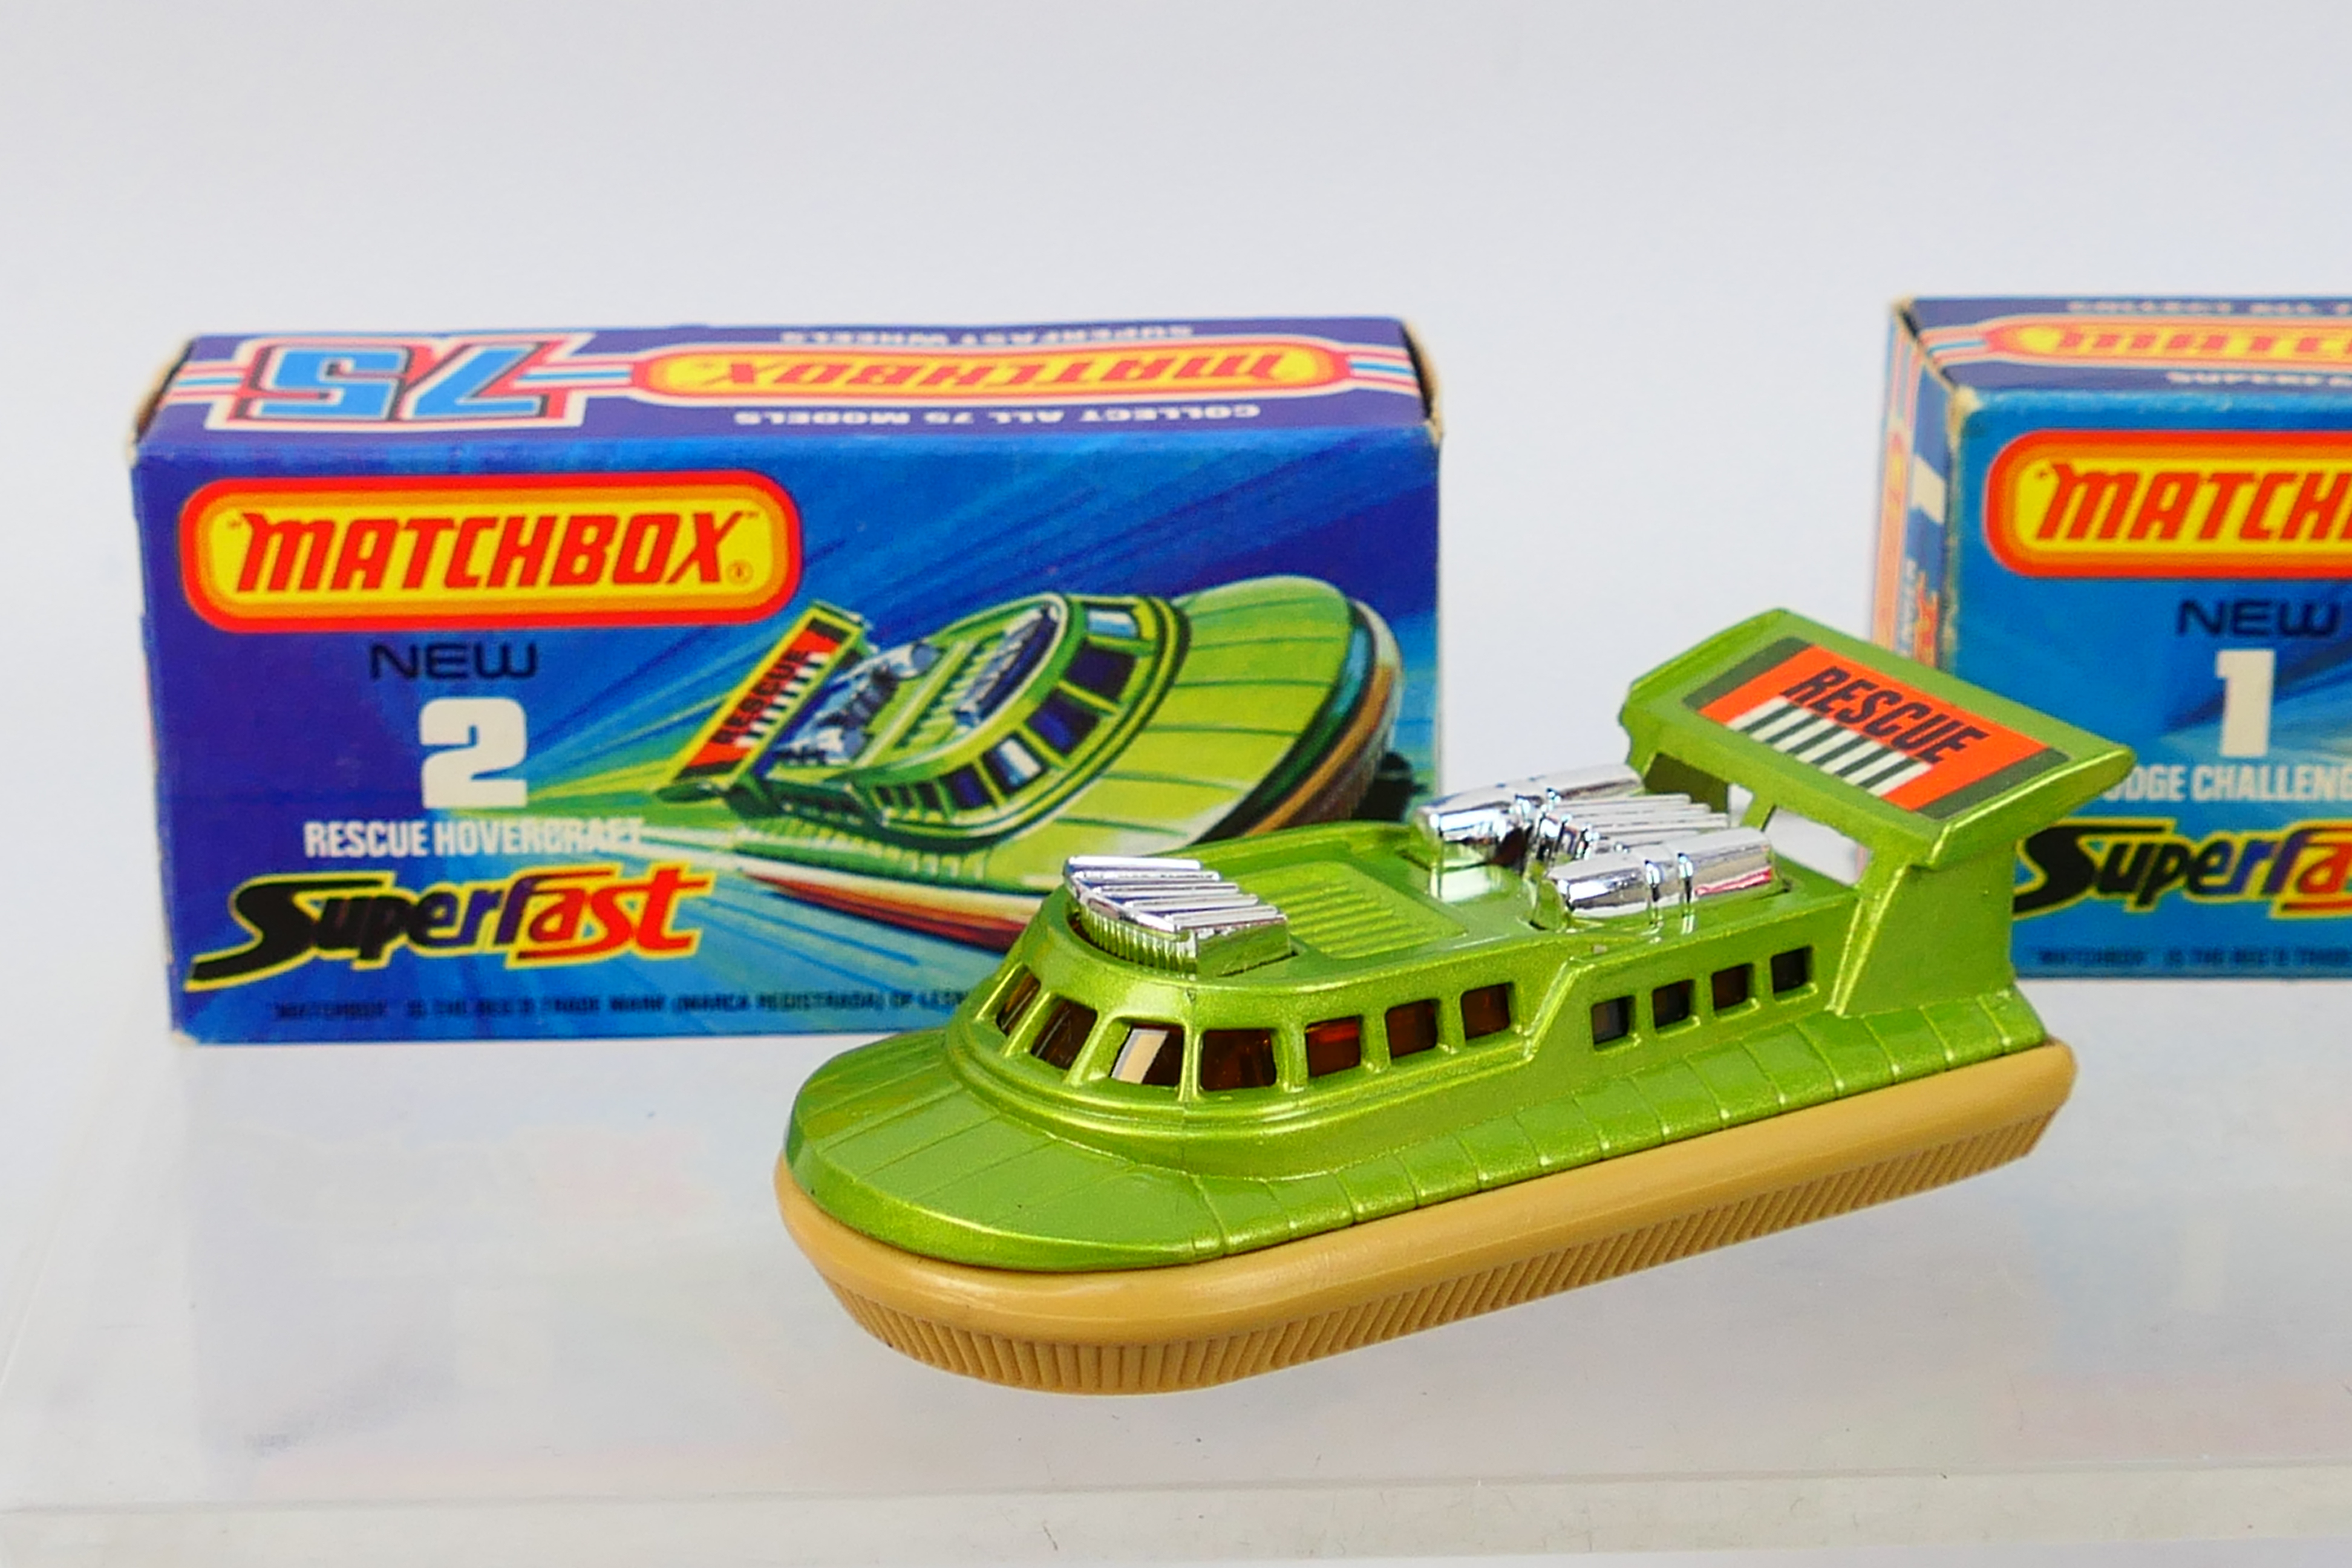 Matchbox - Superfast - 4 x boxed models, Dodge Challenger # 1, Rescue Hovercraft # 2, - Image 2 of 6